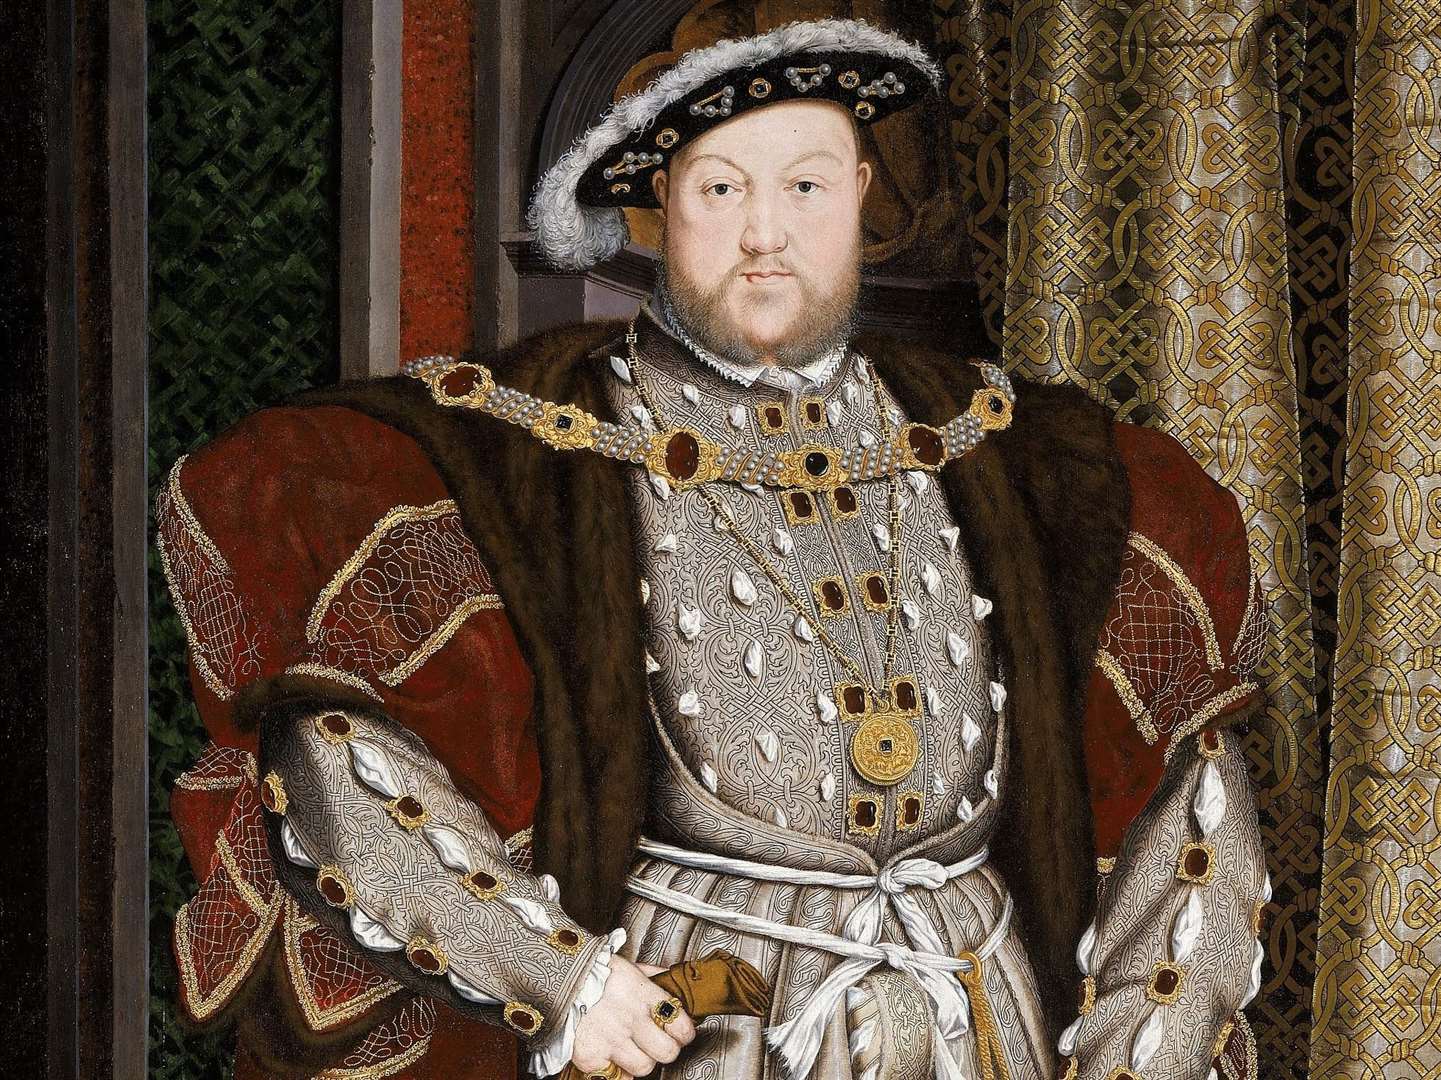 Henry VIII and the Reformation ruined the trade in religious relics